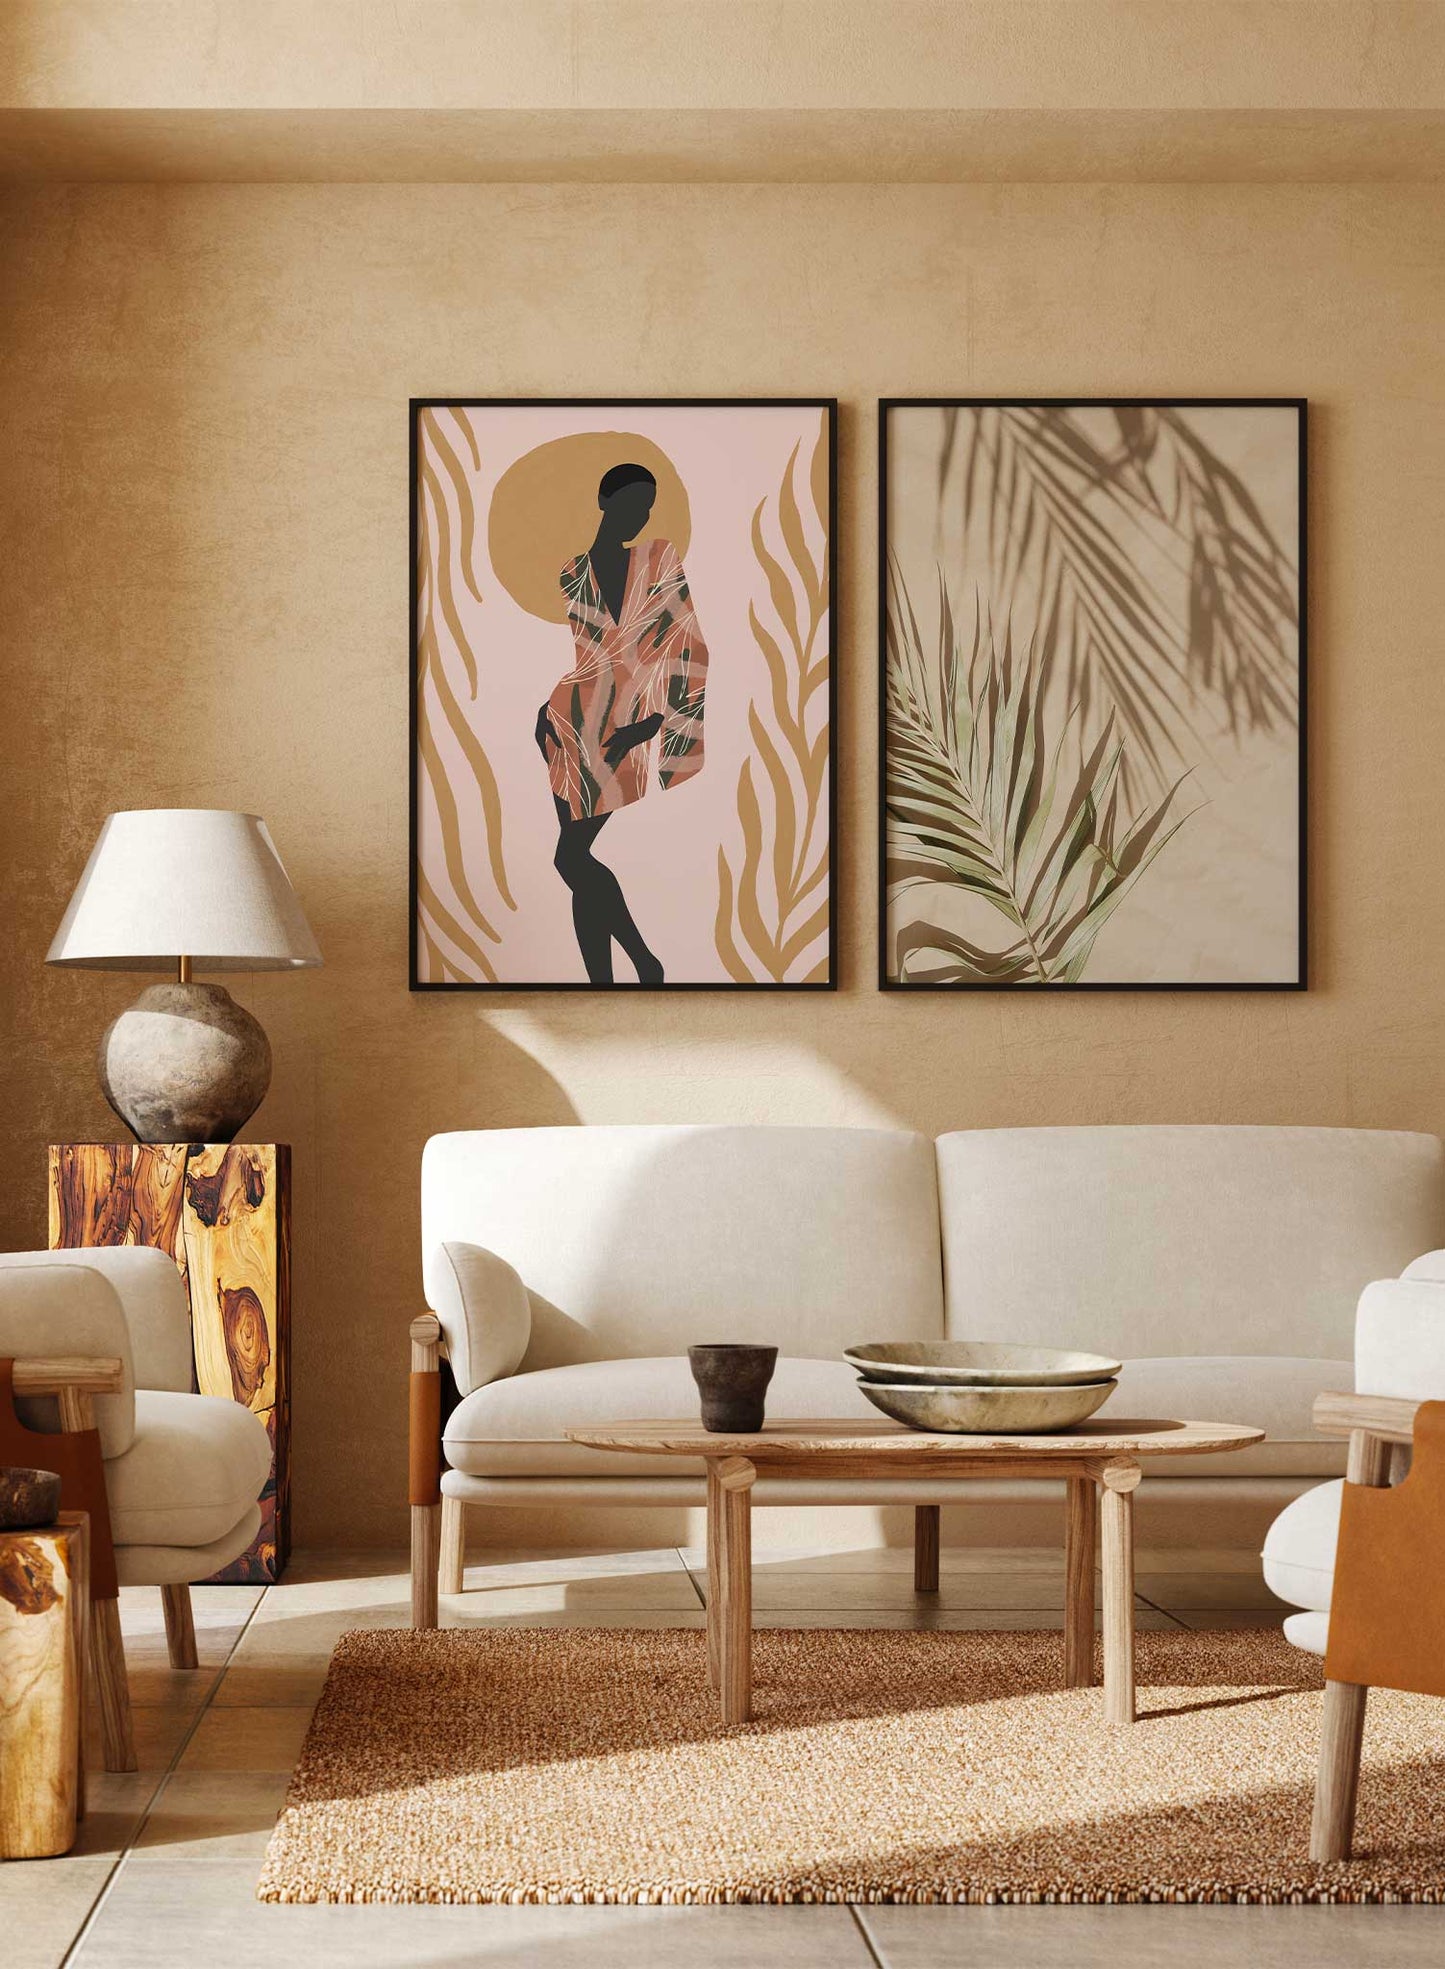 Amara is a minimalist illustration of a woman wearing a pink and green dress posing like a model by Opposite Wall.